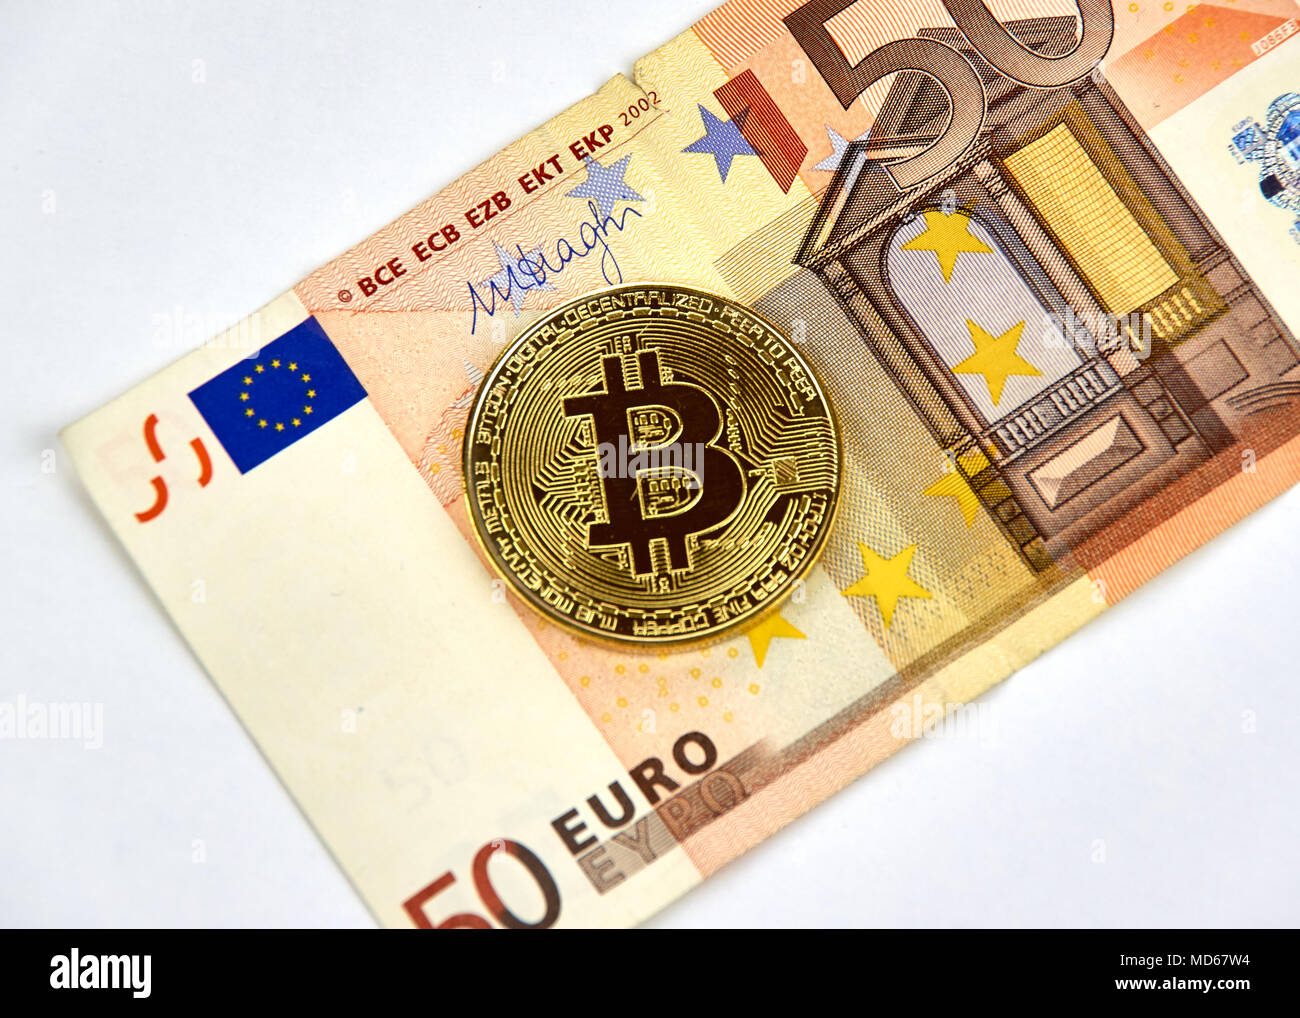 MONTREAL, CANADA - MARCH 10, 2018: Bitcoin cryptocurrency gold coin and logo on Fifty Euro bank note. Stock Photo